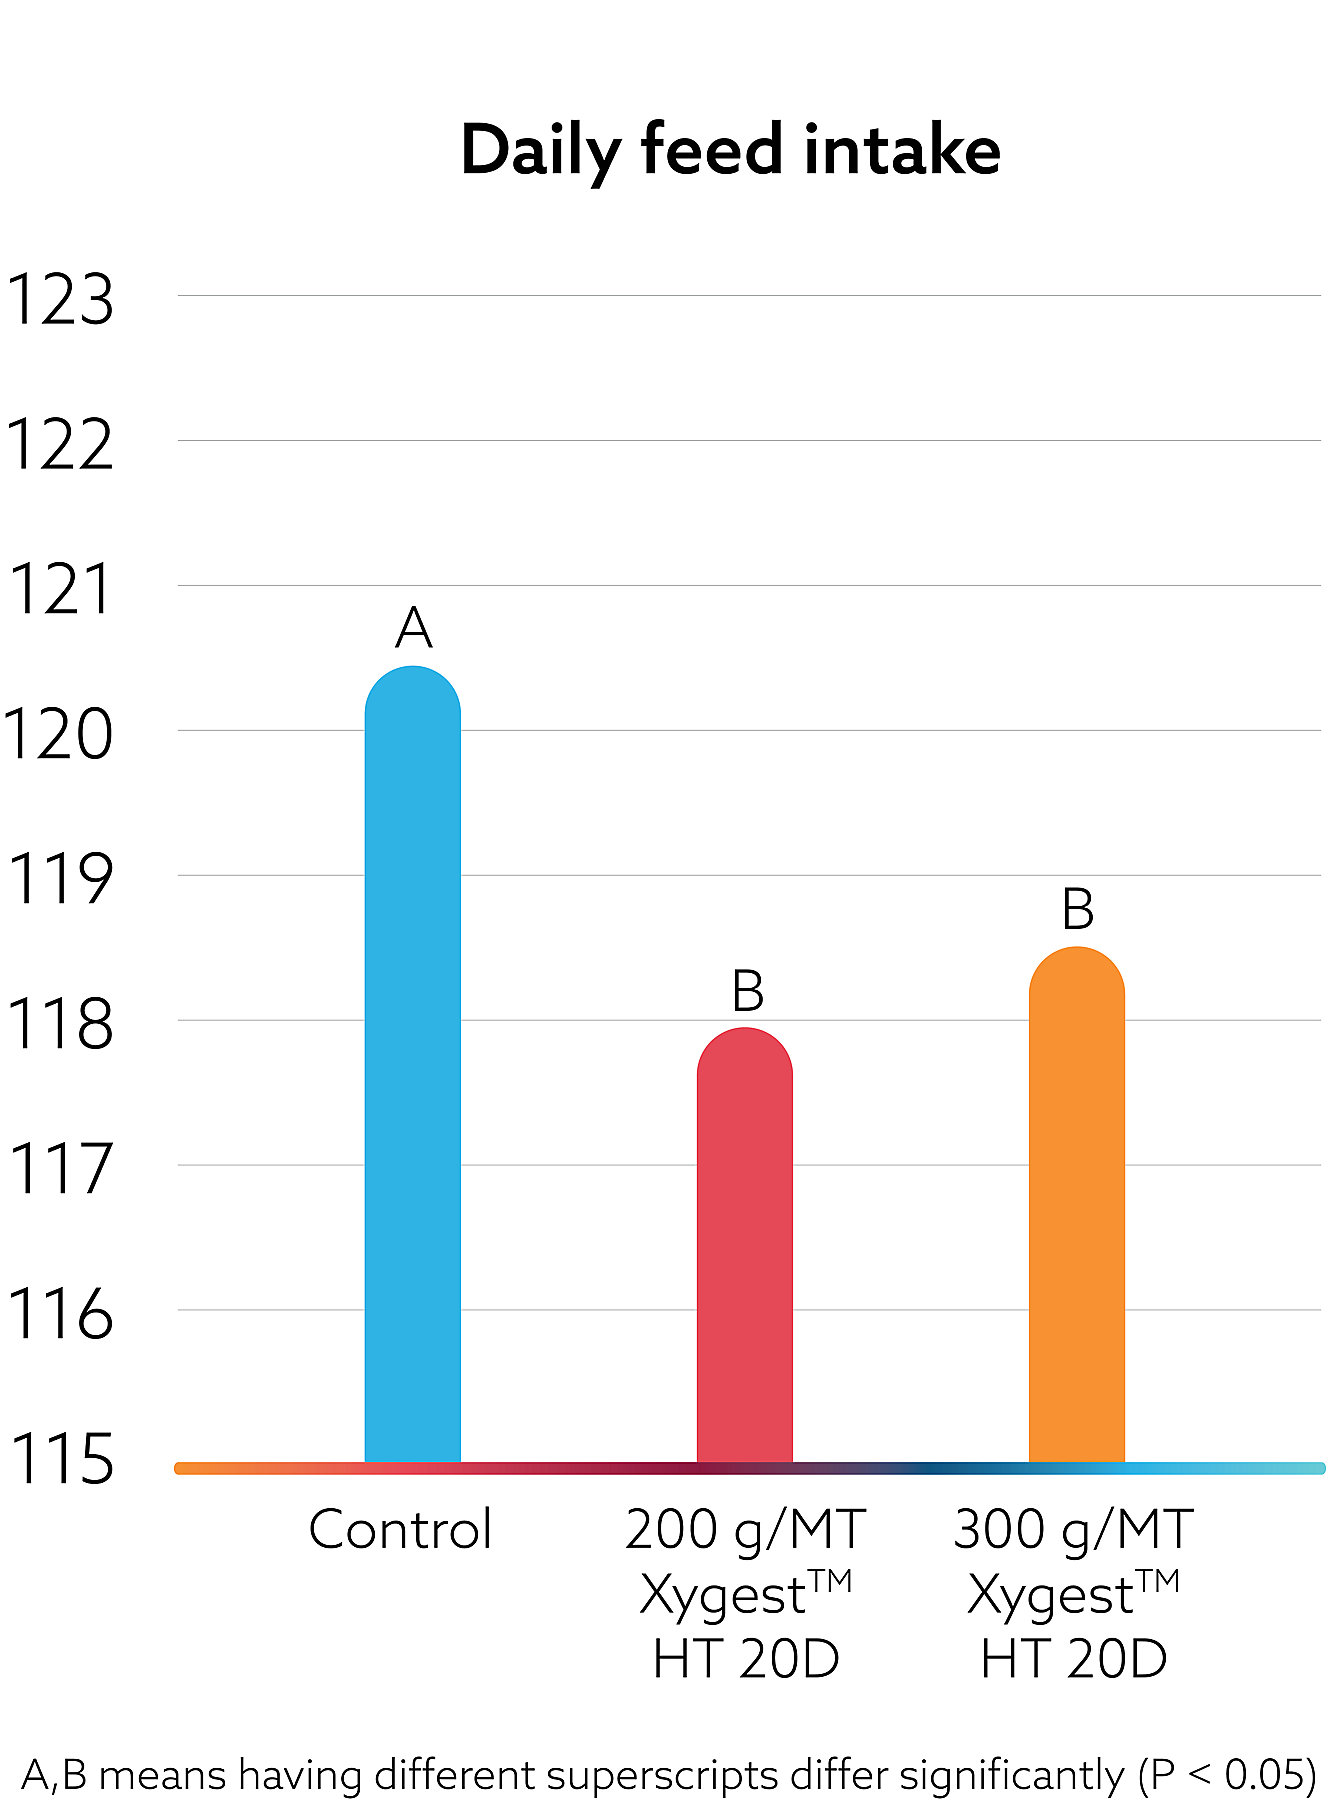 XYGEST HT KAA-Layer Trial Data Daily feed intake graph